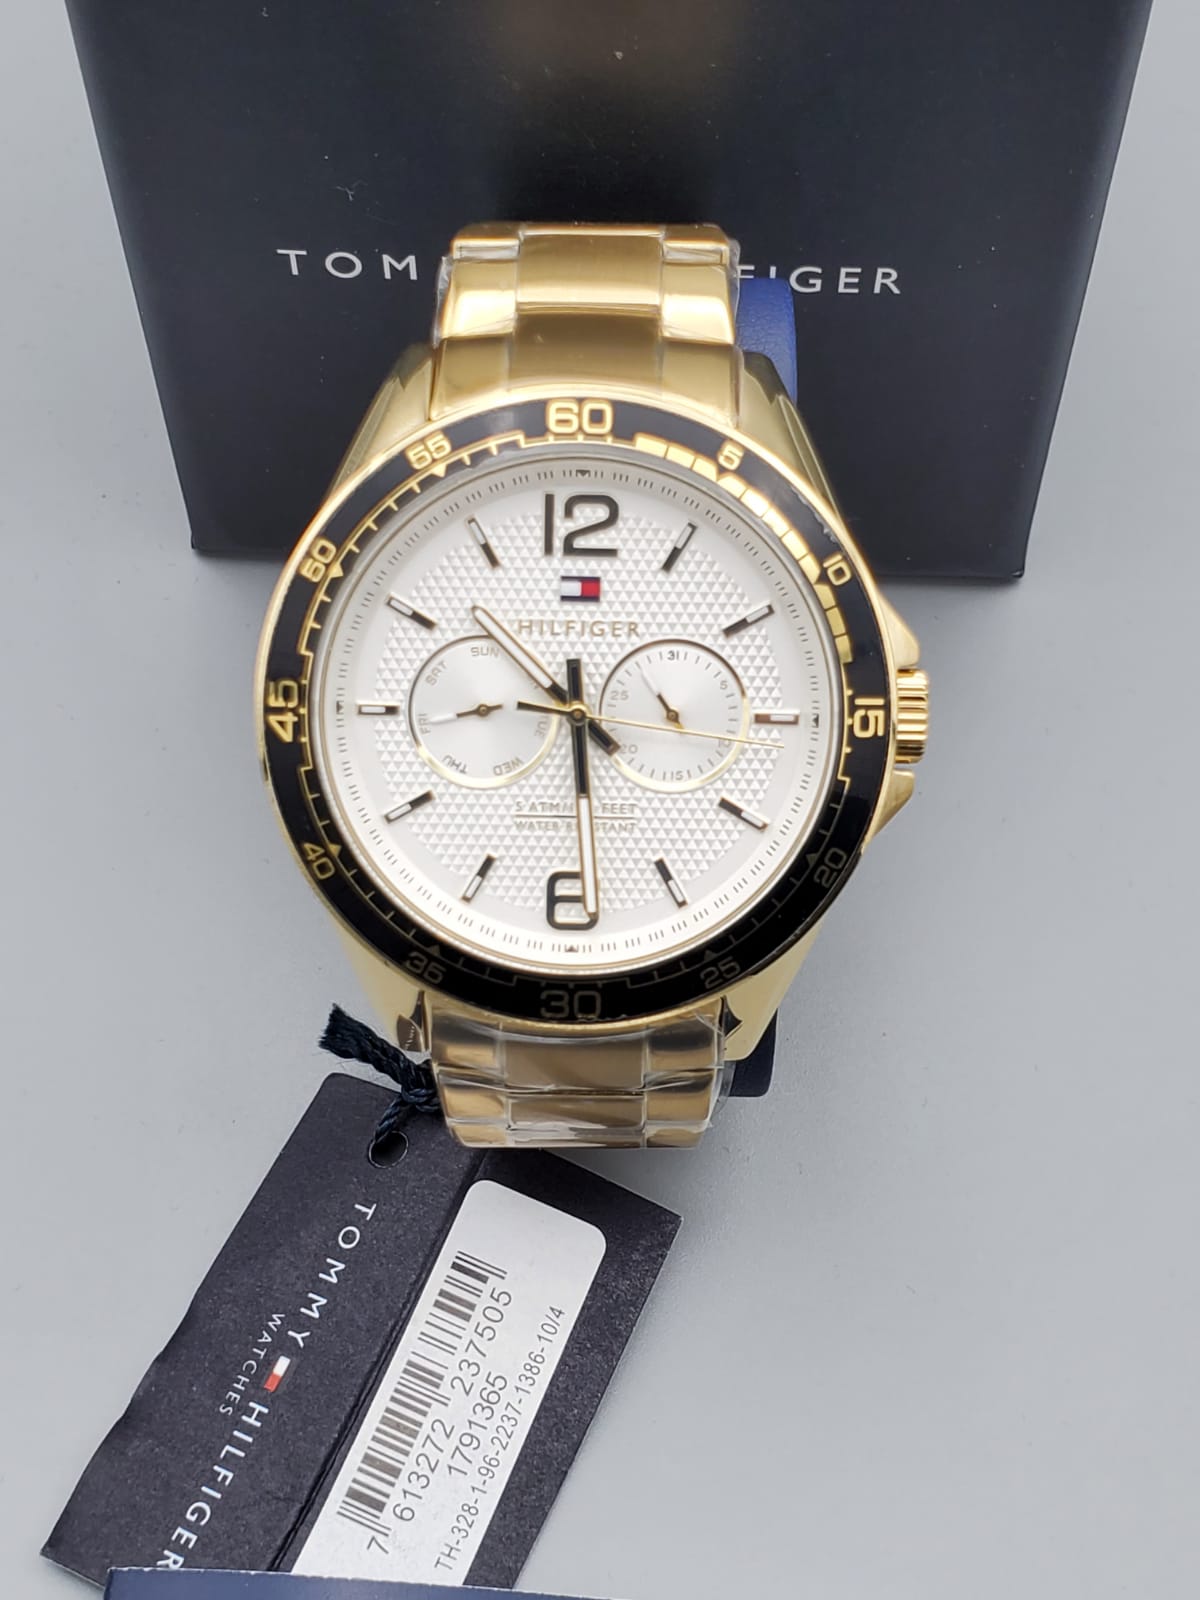 Tommy Hilfiger Men's Sophisticated Sport Quartz Watch with Gold-Tone-Stainless-Steel (Model: 1791365)